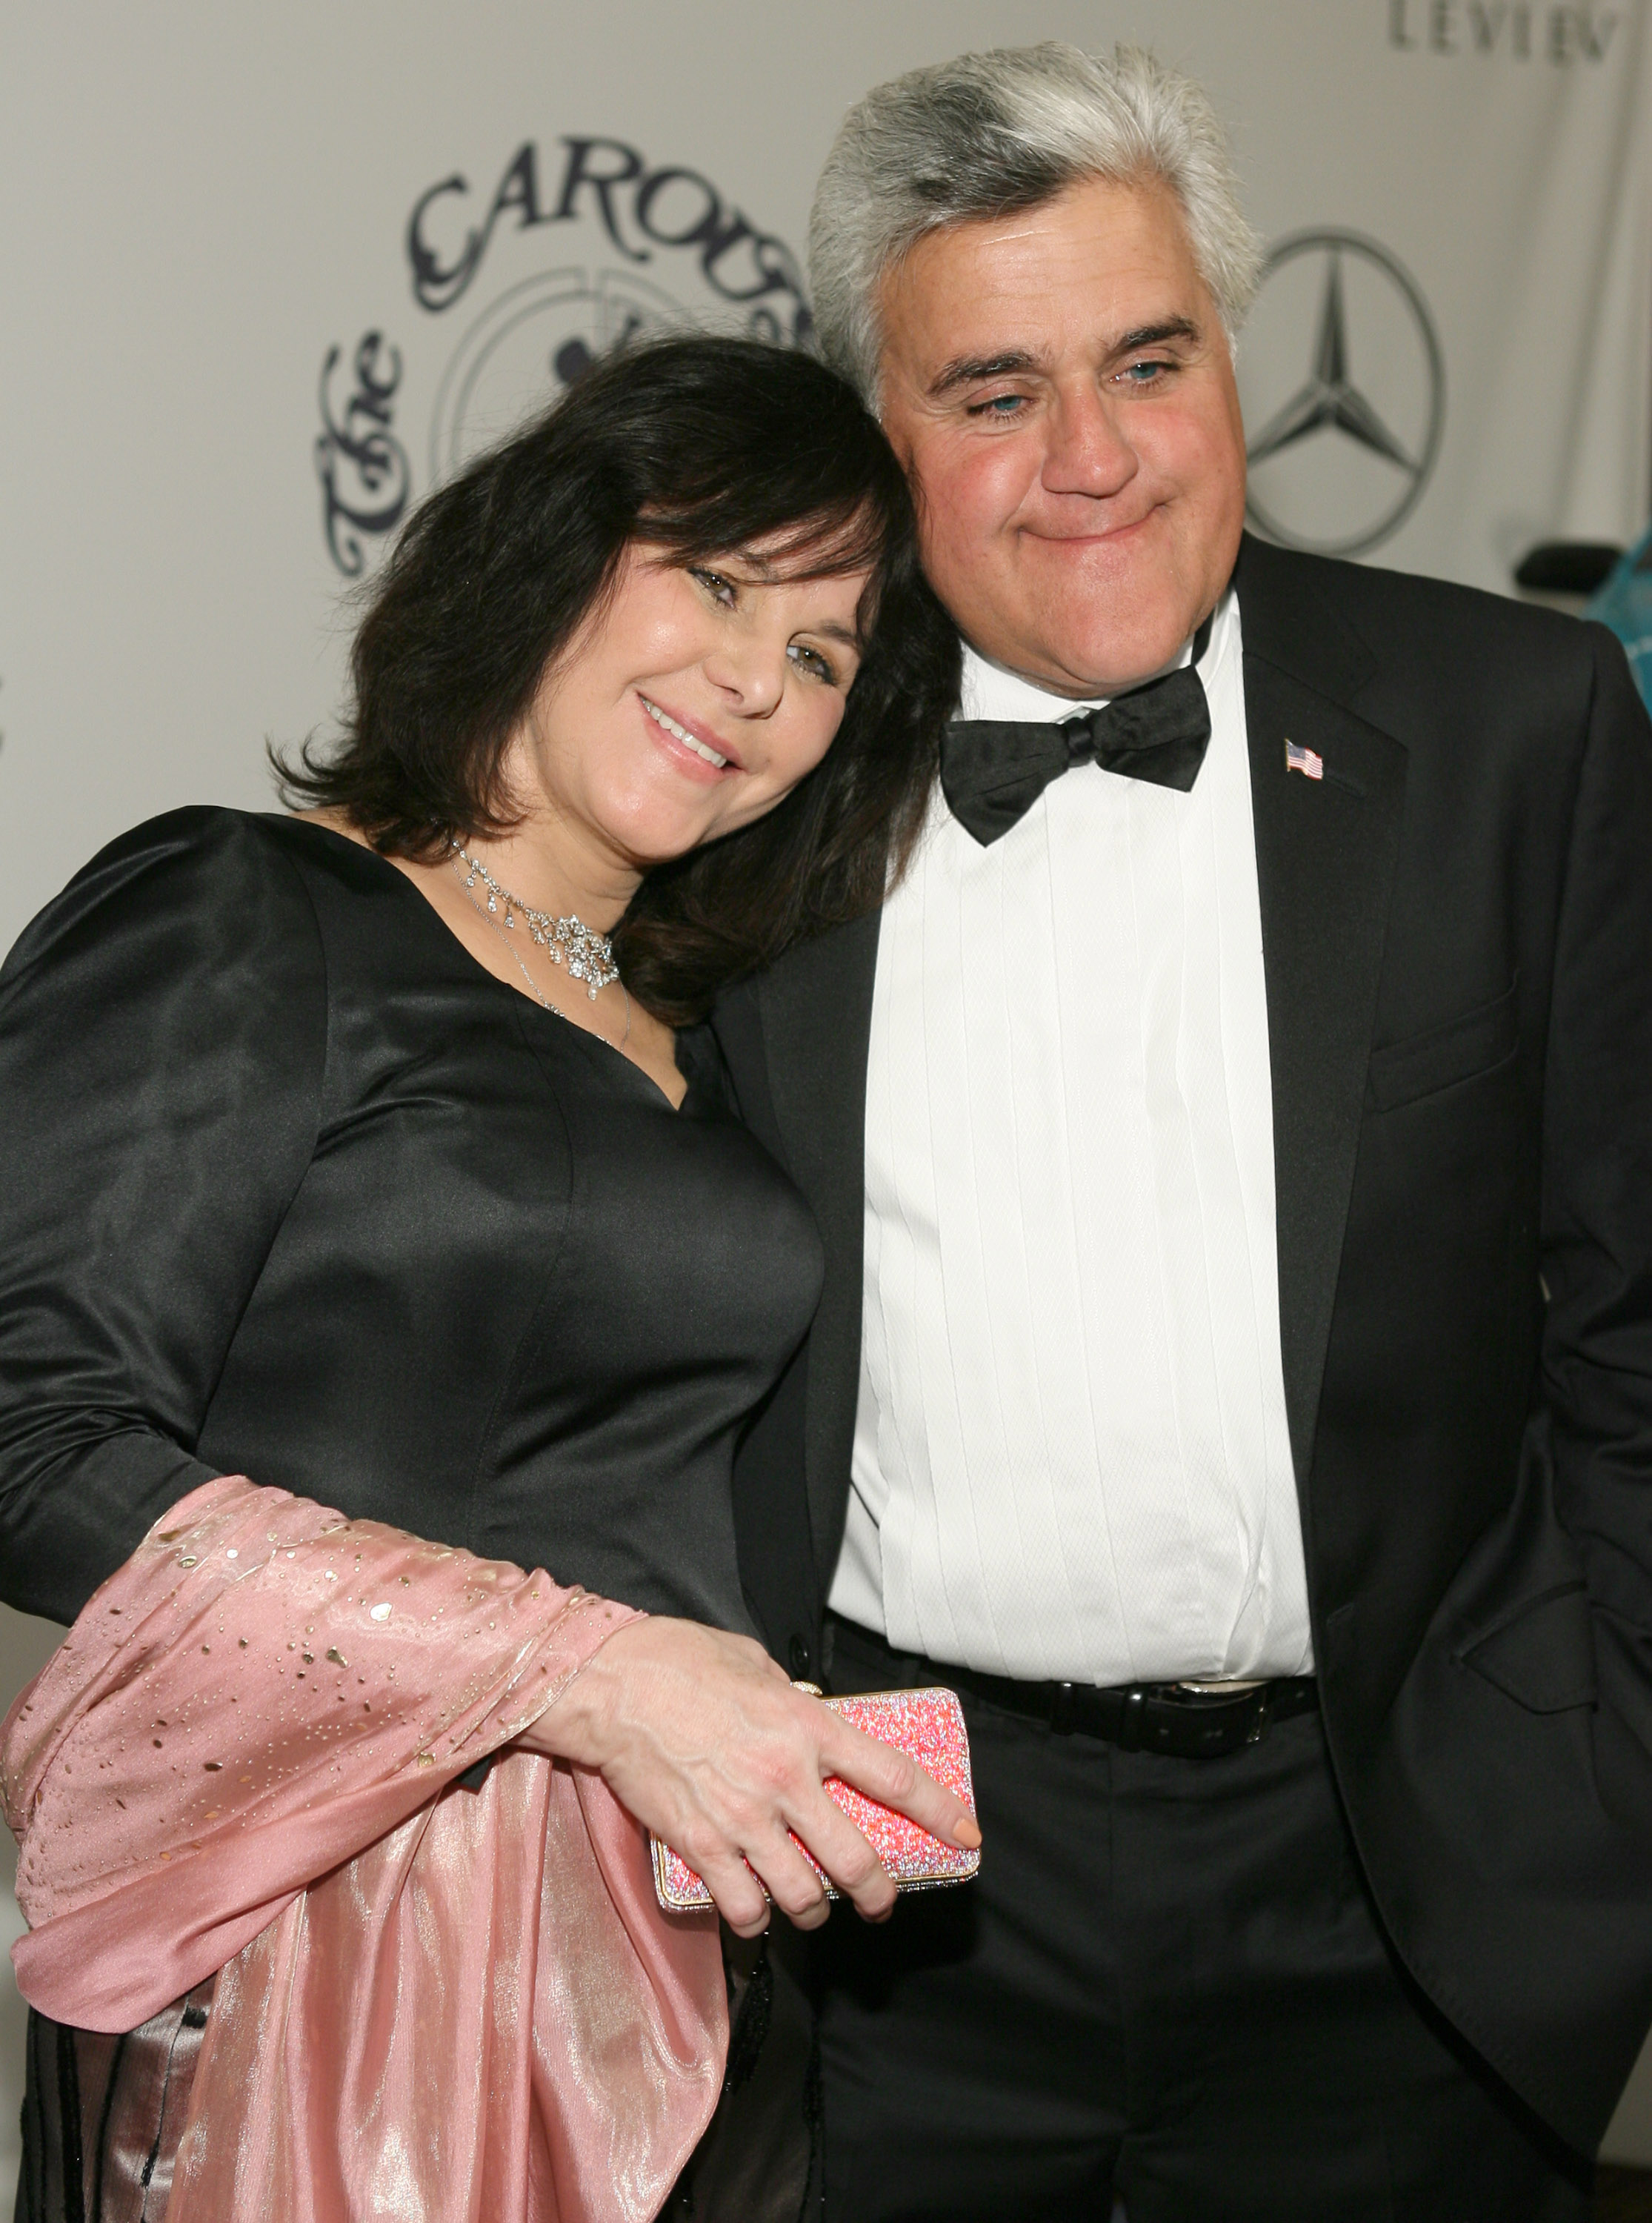 Mavis Leno and Jay Leno during Mercedes-Benz Presents the 17th Carousel of Hope Ball - VIP Room at Beverly Hilton in Beverly Hills, California. | Source: Getty Images